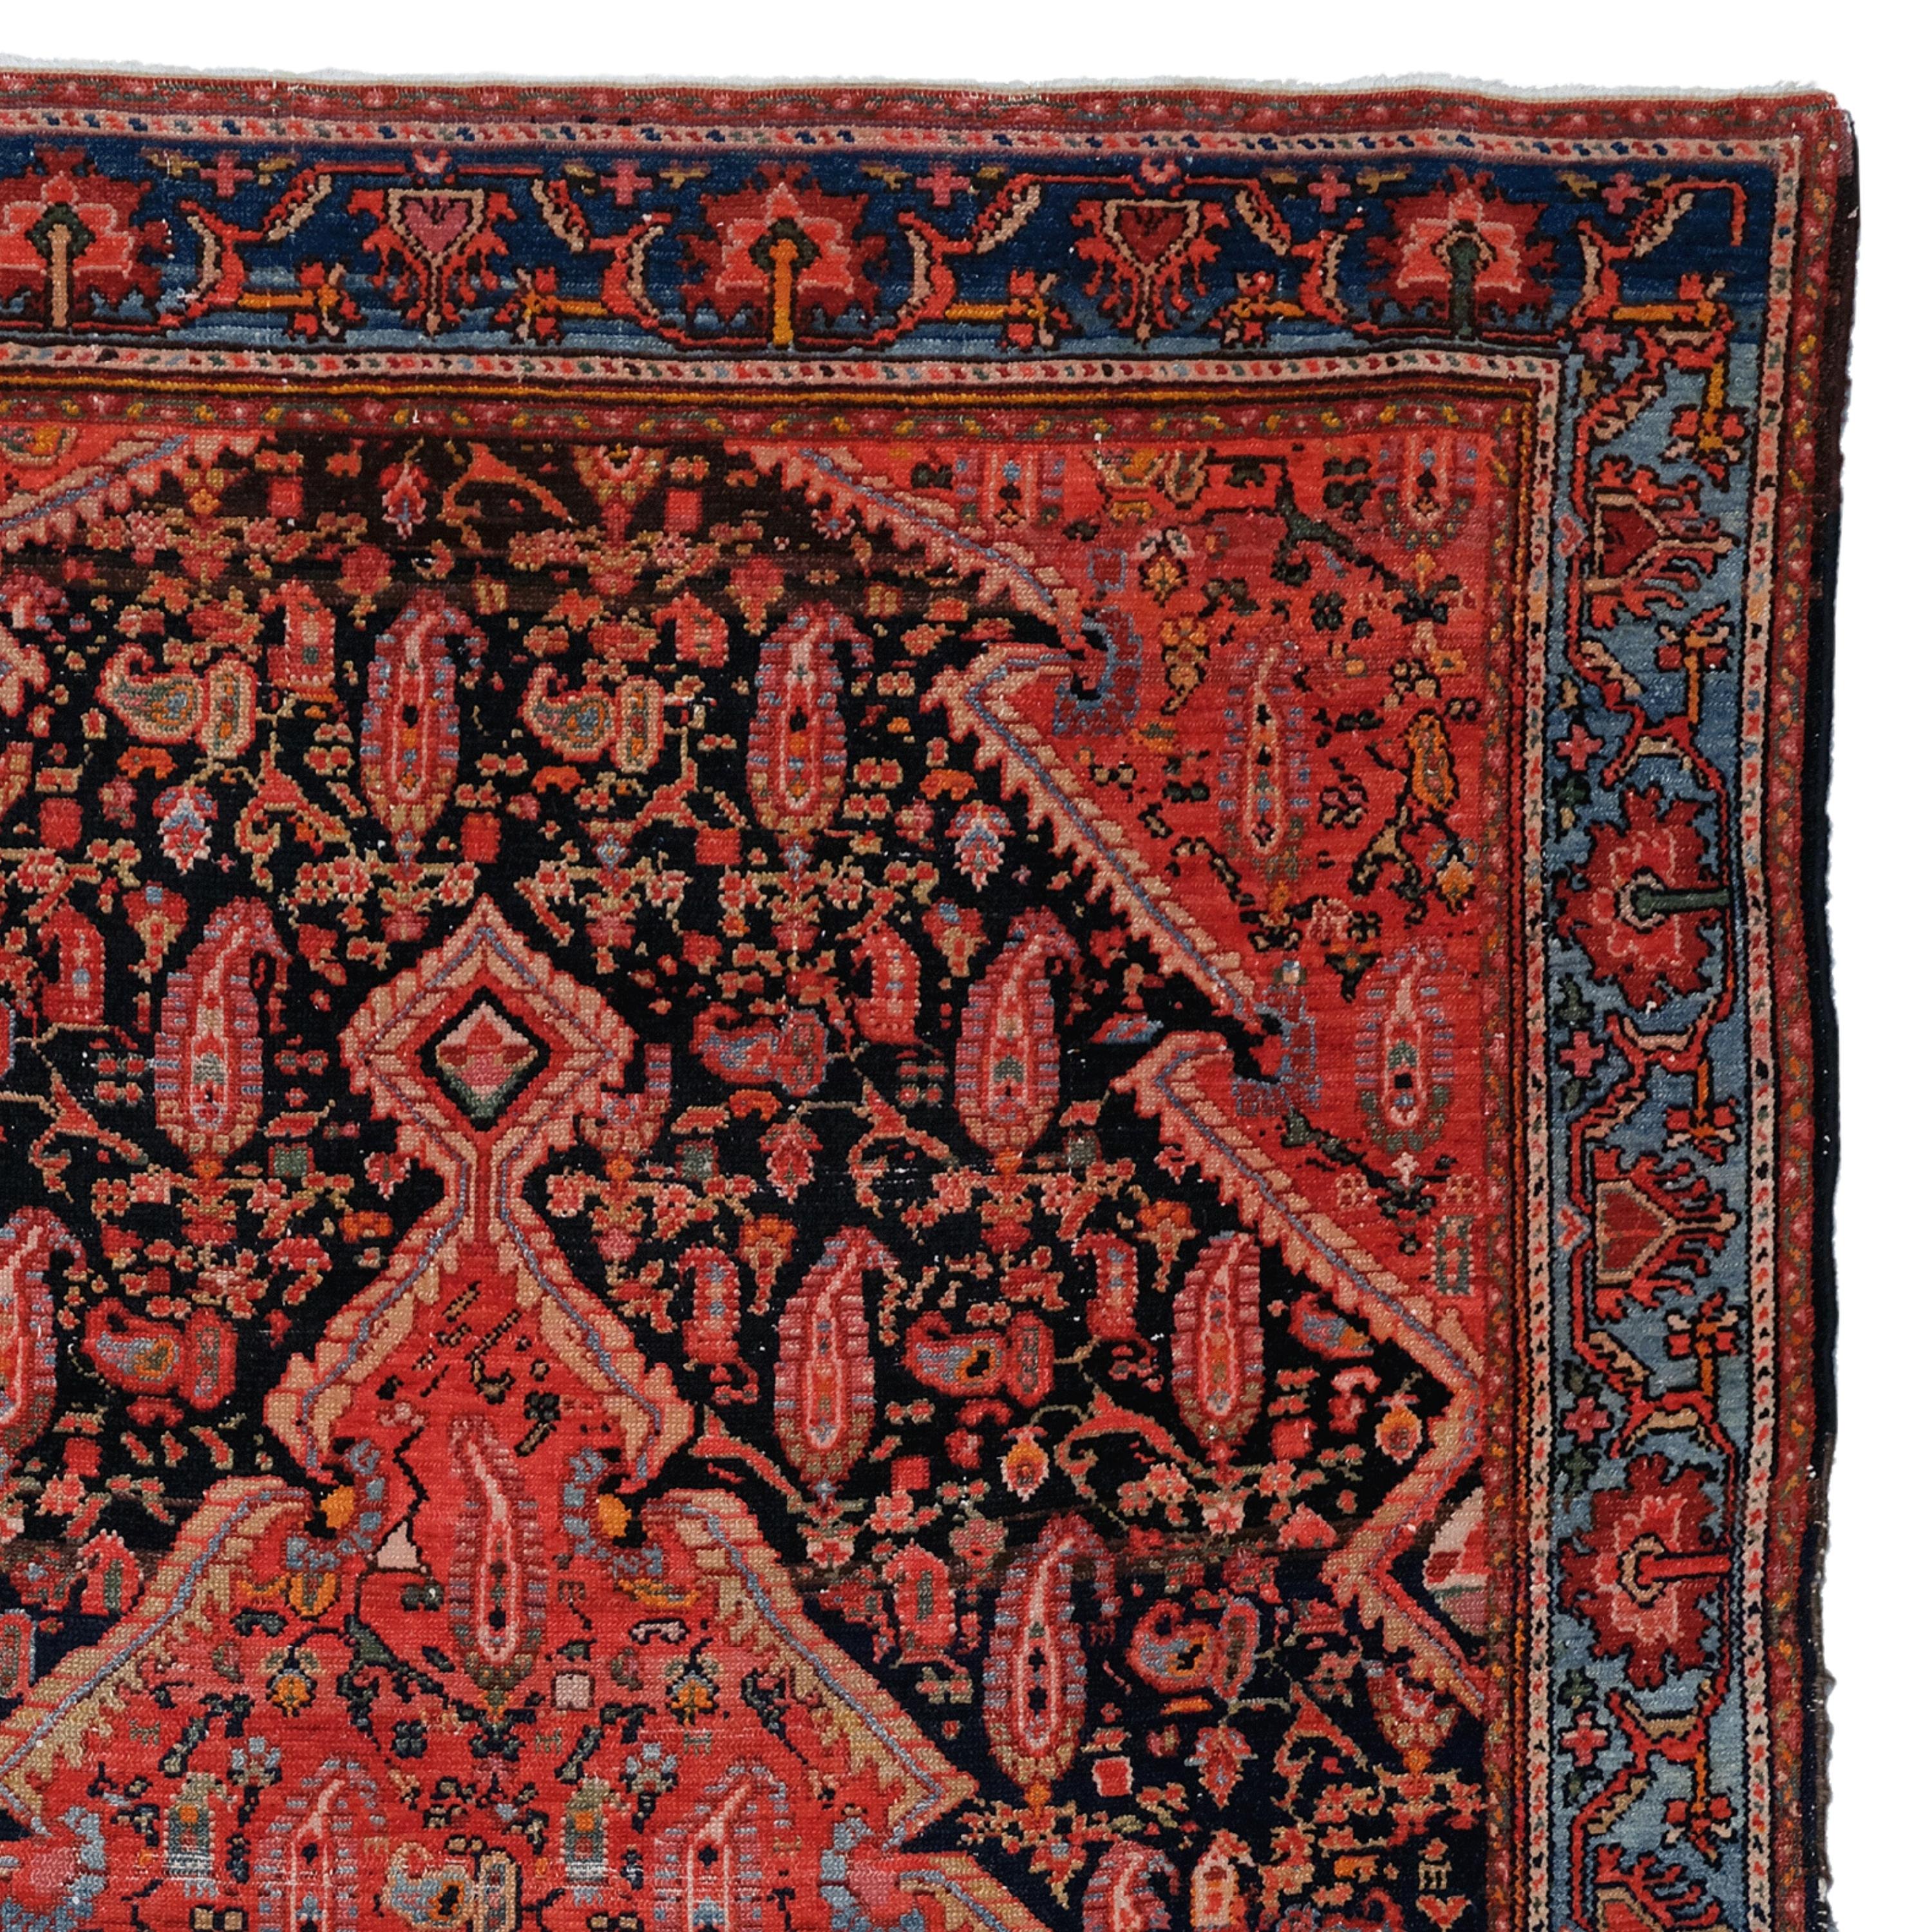 Antique Melayer Rug - 19th Century Melayer Rug, Vintage Rug, Malayer Rug In Good Condition For Sale In Sultanahmet, 34